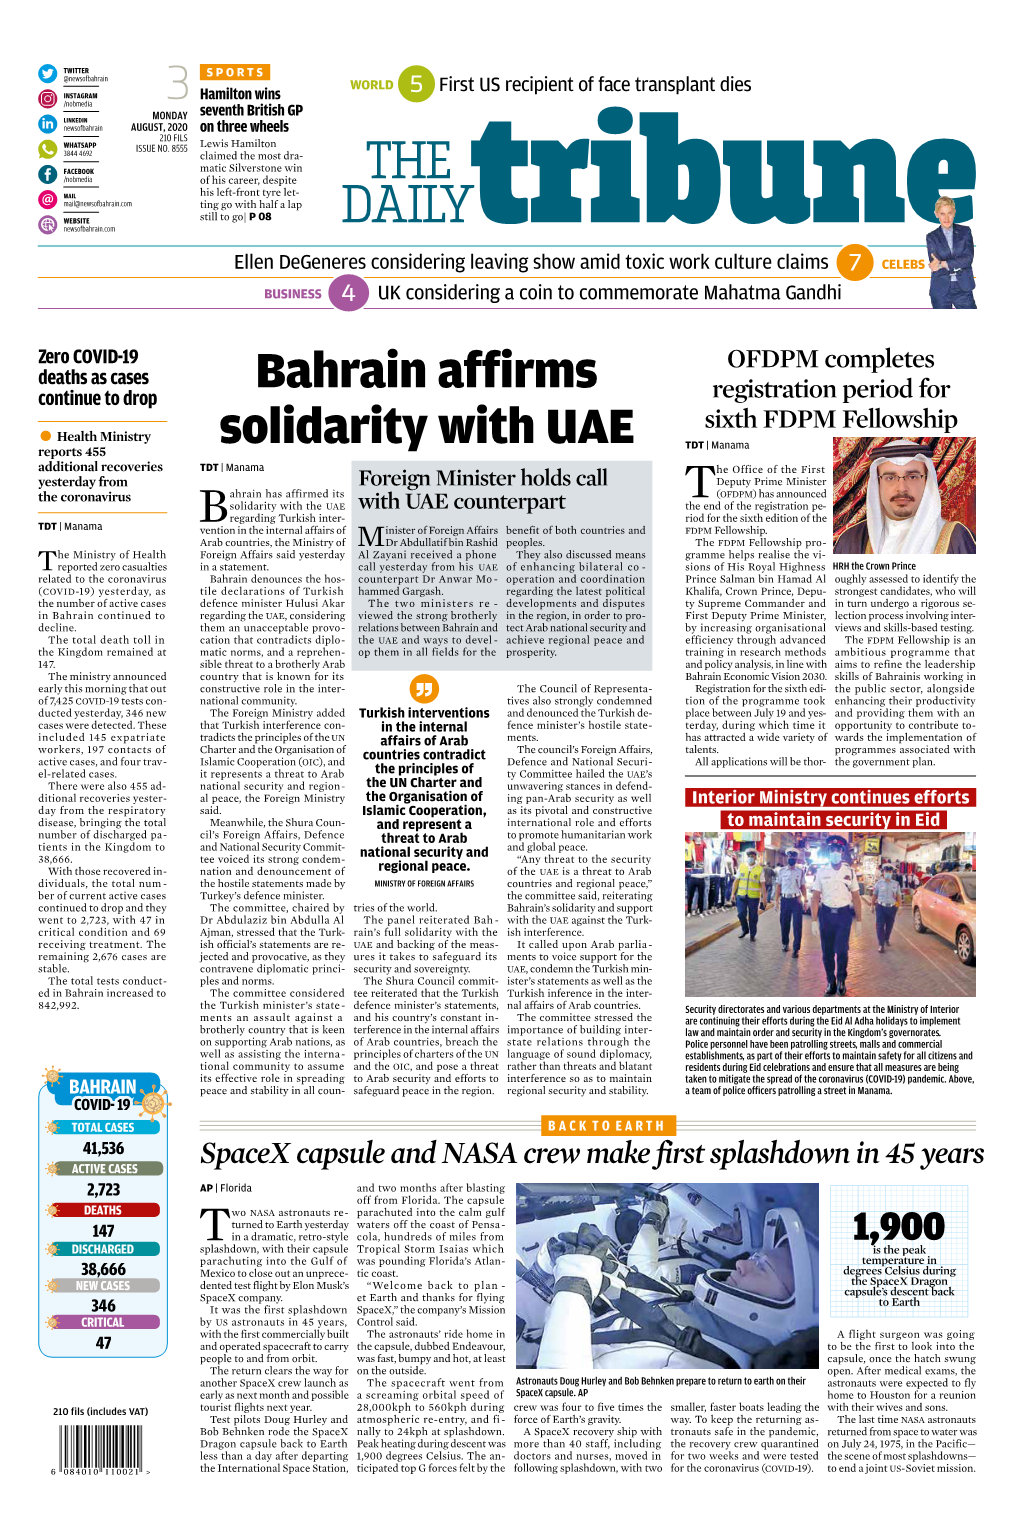 Bahrain Affirms Solidarity With